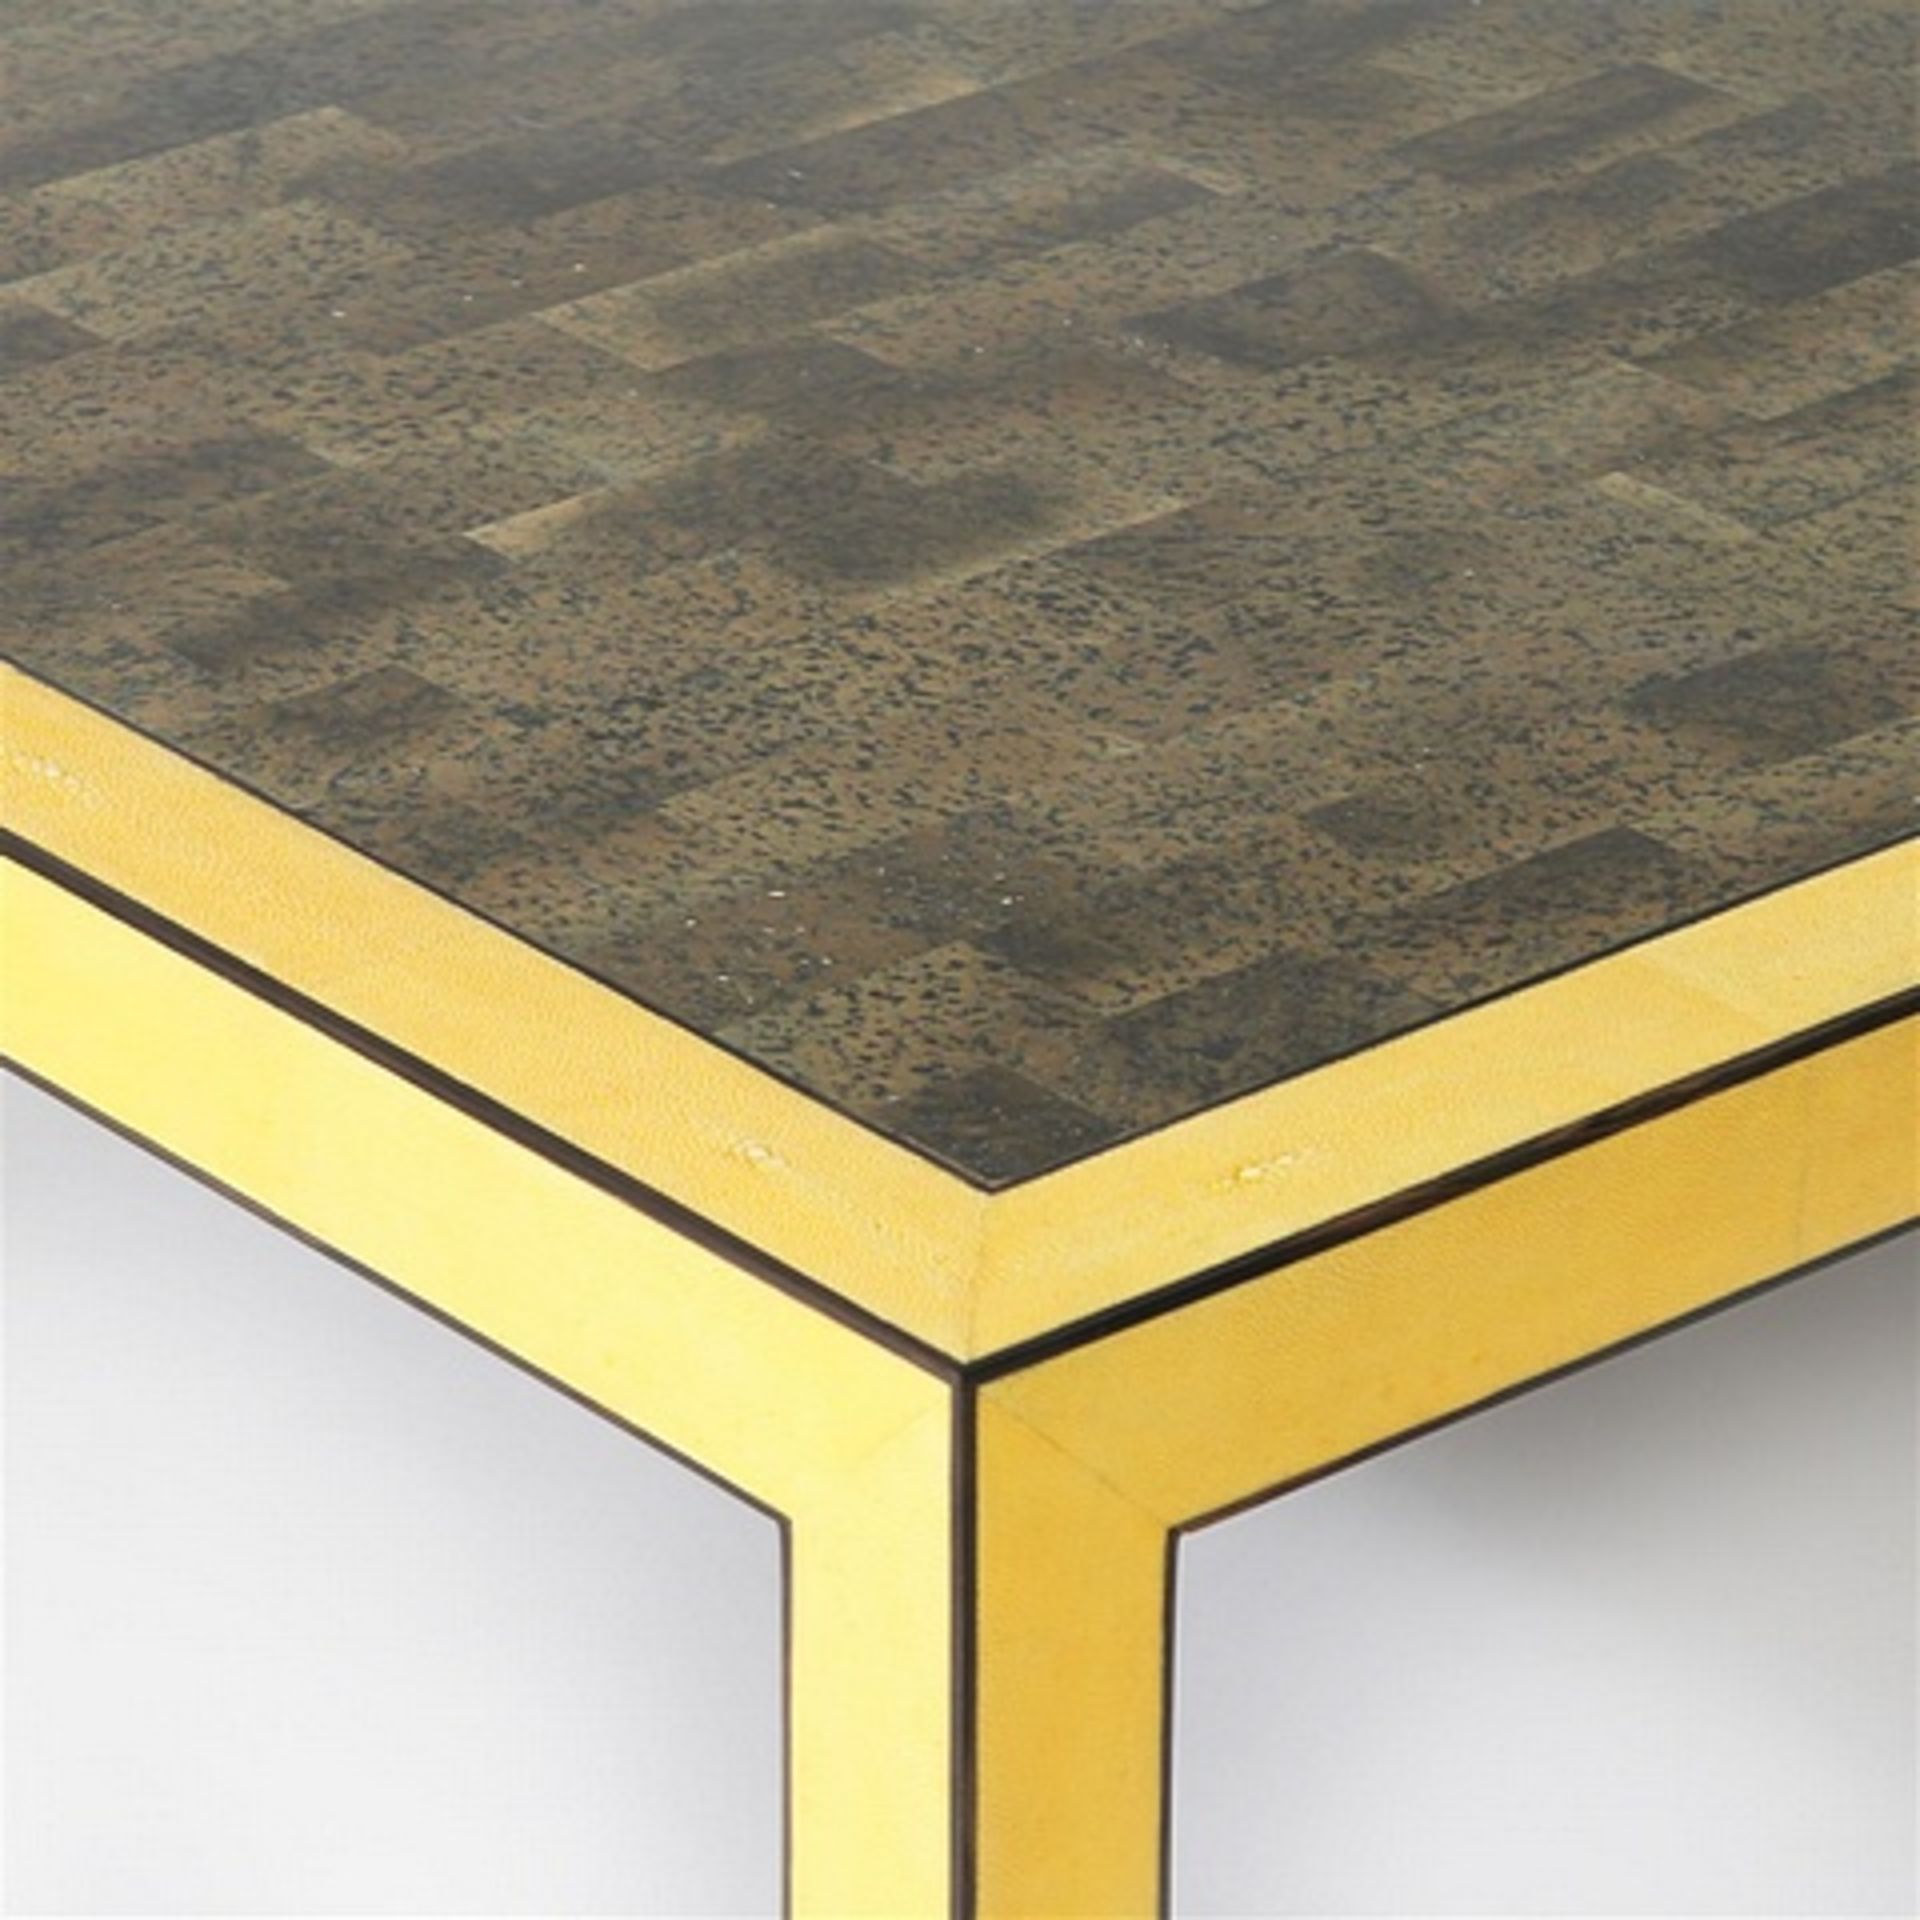 Table Stingray golden yellow rectangular low level coffee table embellished with contrasting gold - Image 2 of 4